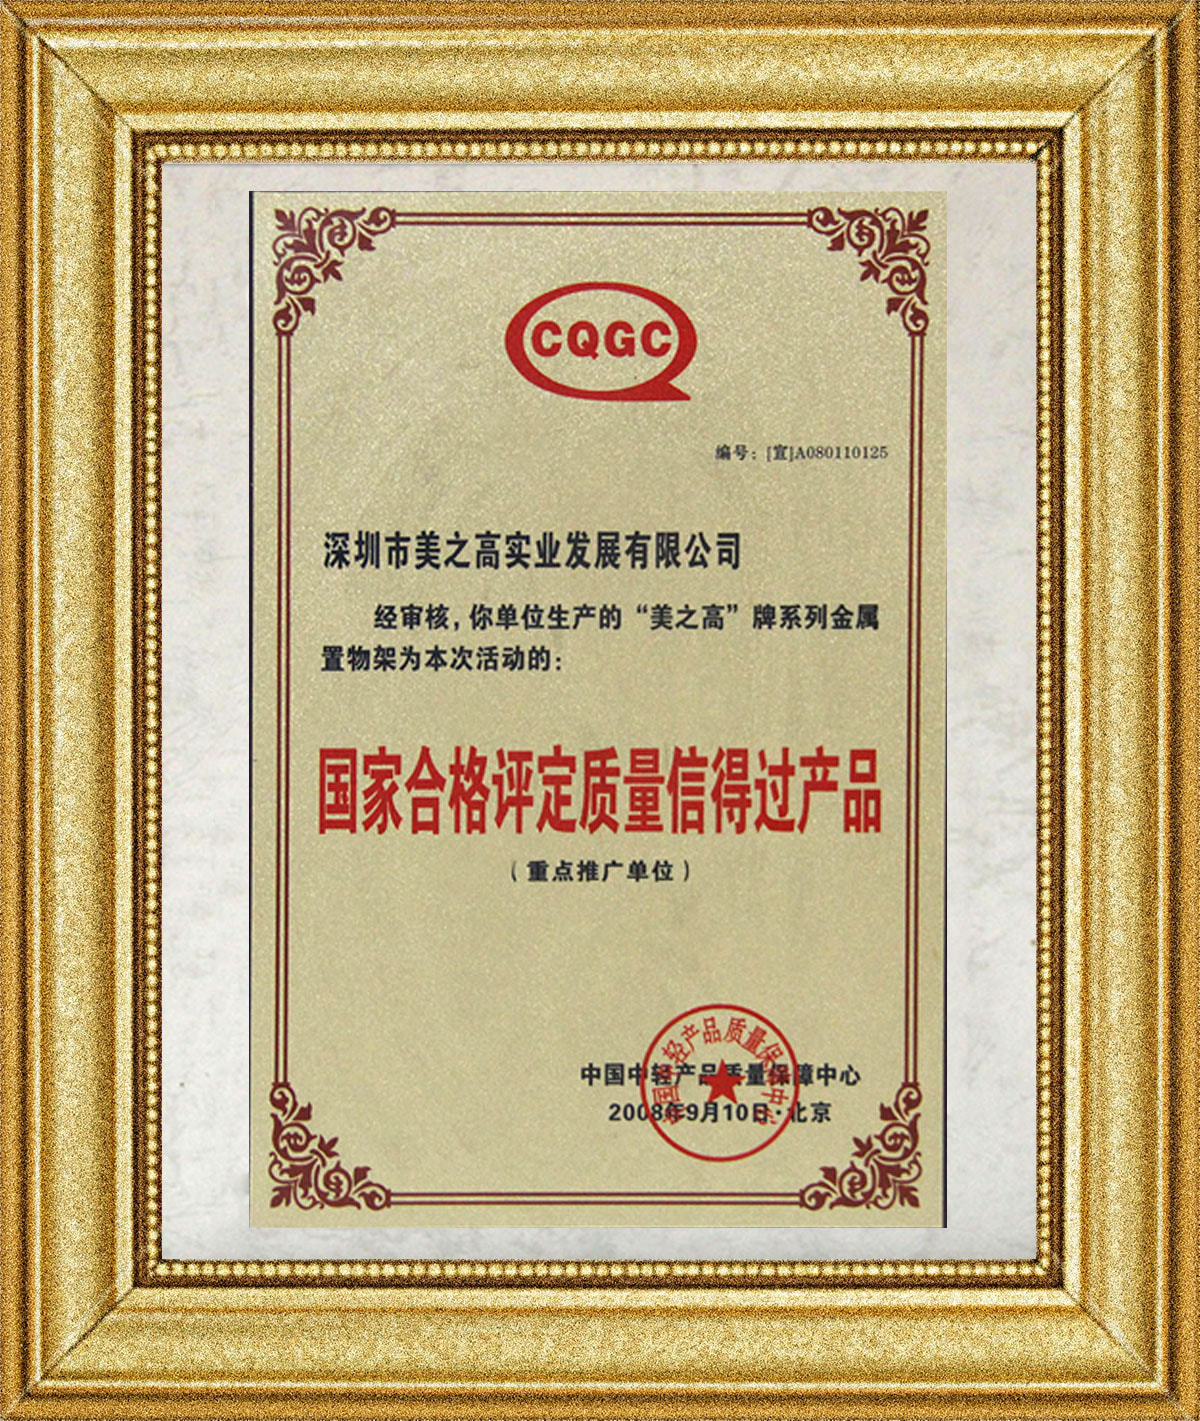 National conformity assessment quality trustworthy product